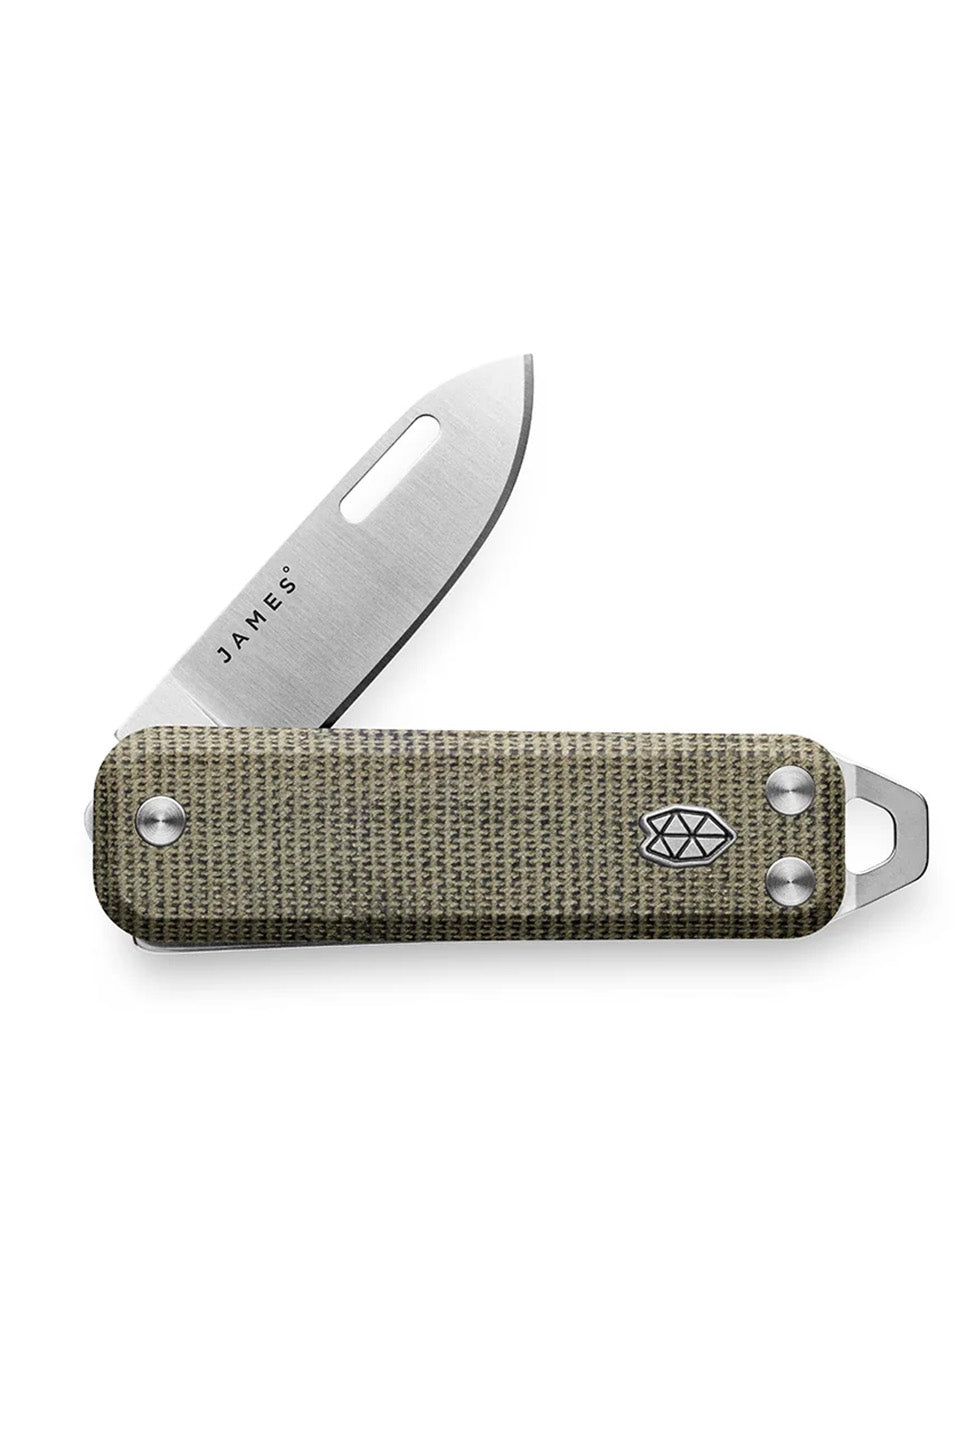 The James Brand - The Elko Knife - OD Green/Stainless/Micarta/Straight